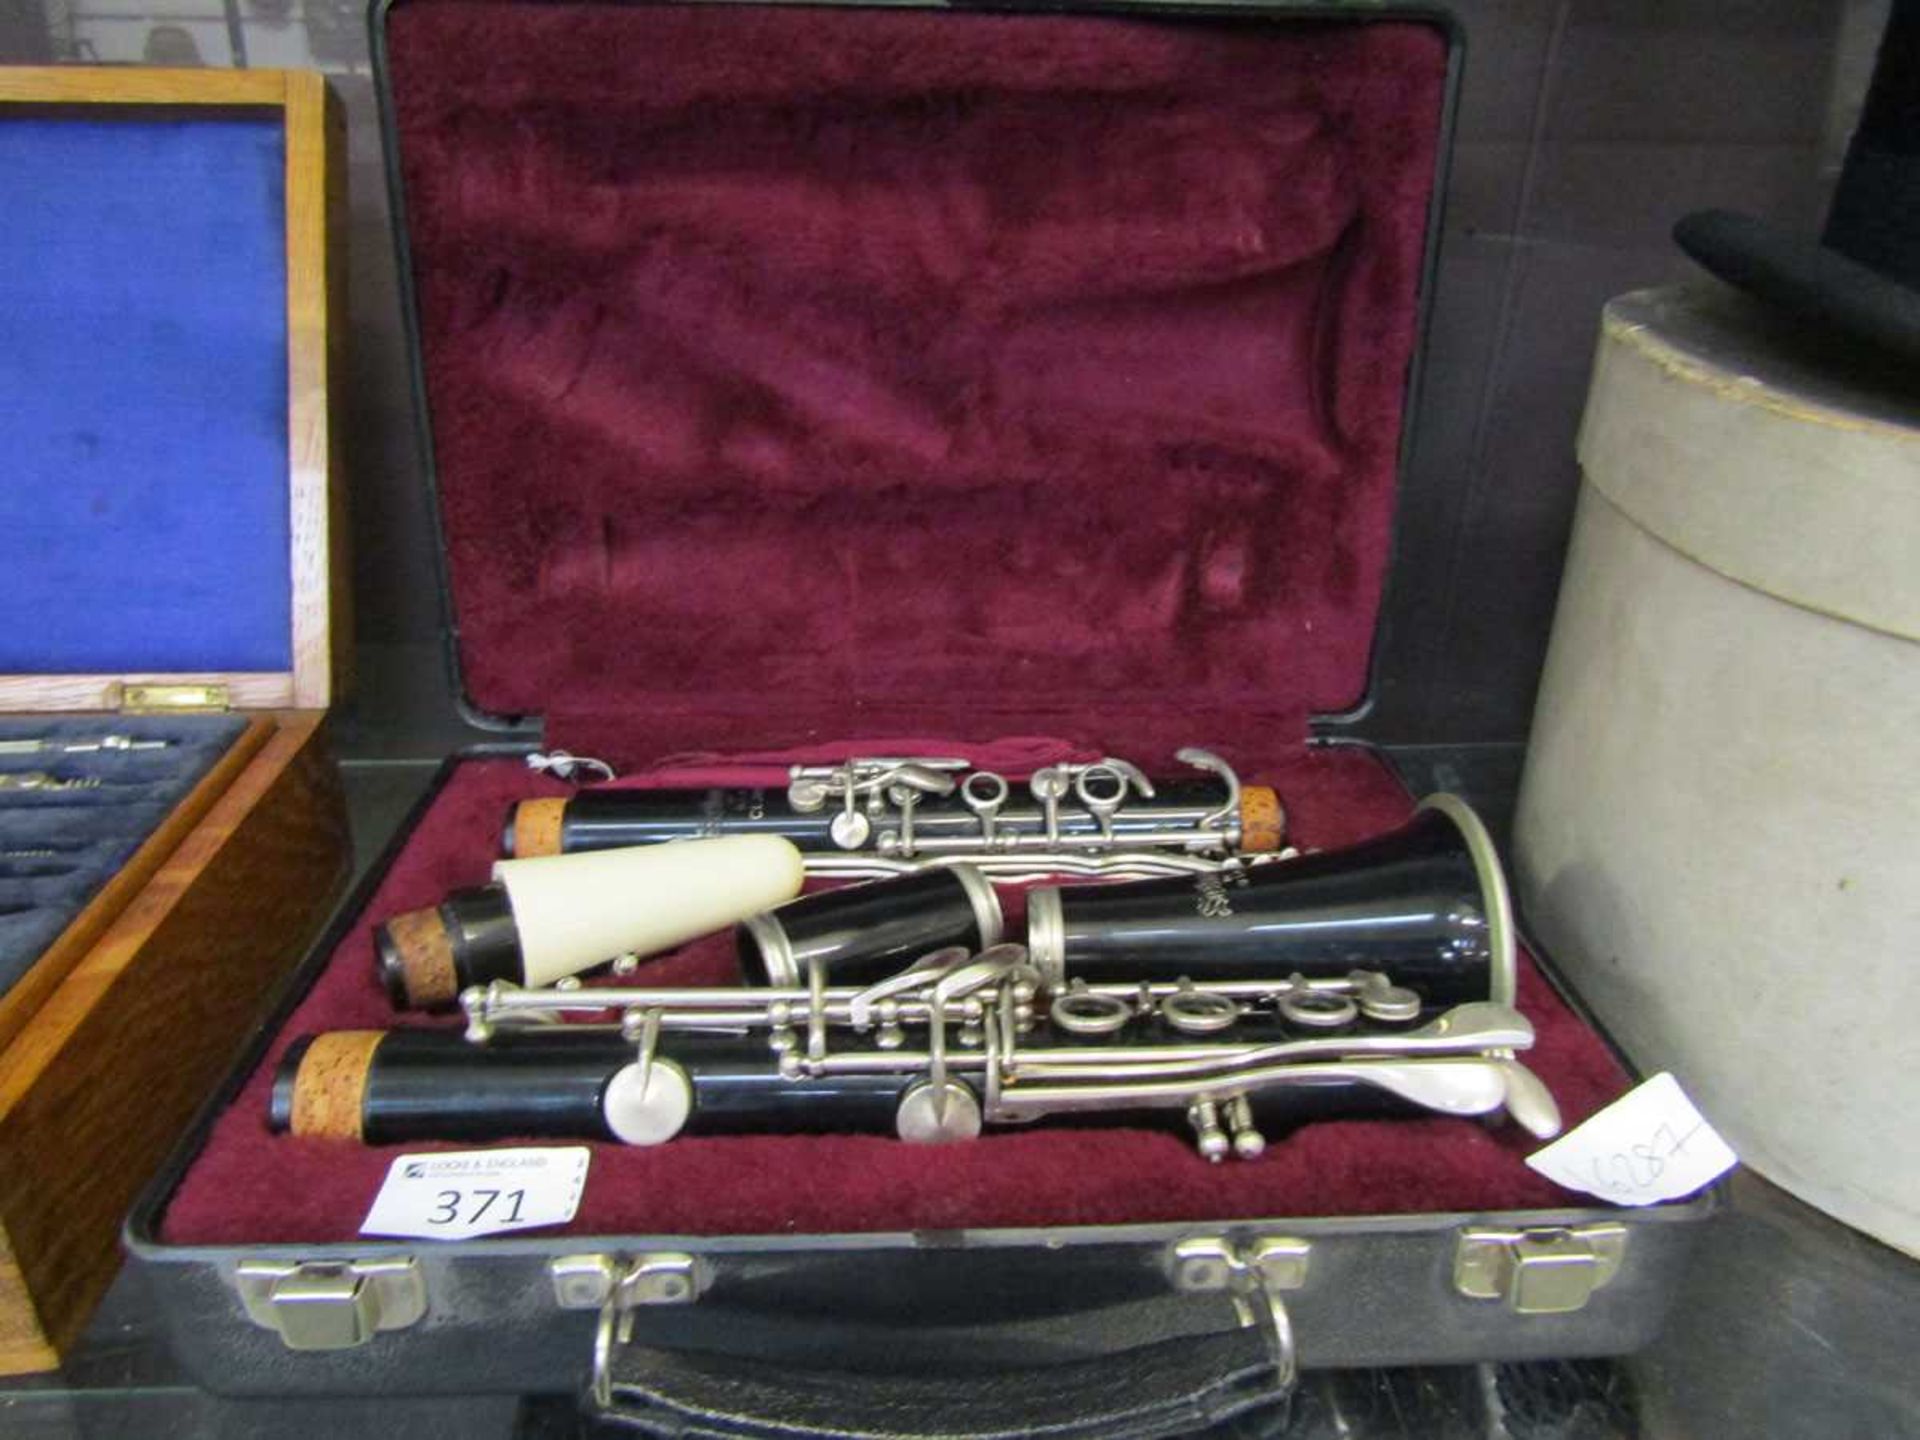 A mid-20th century Selmer CL300 clarinet in hard case